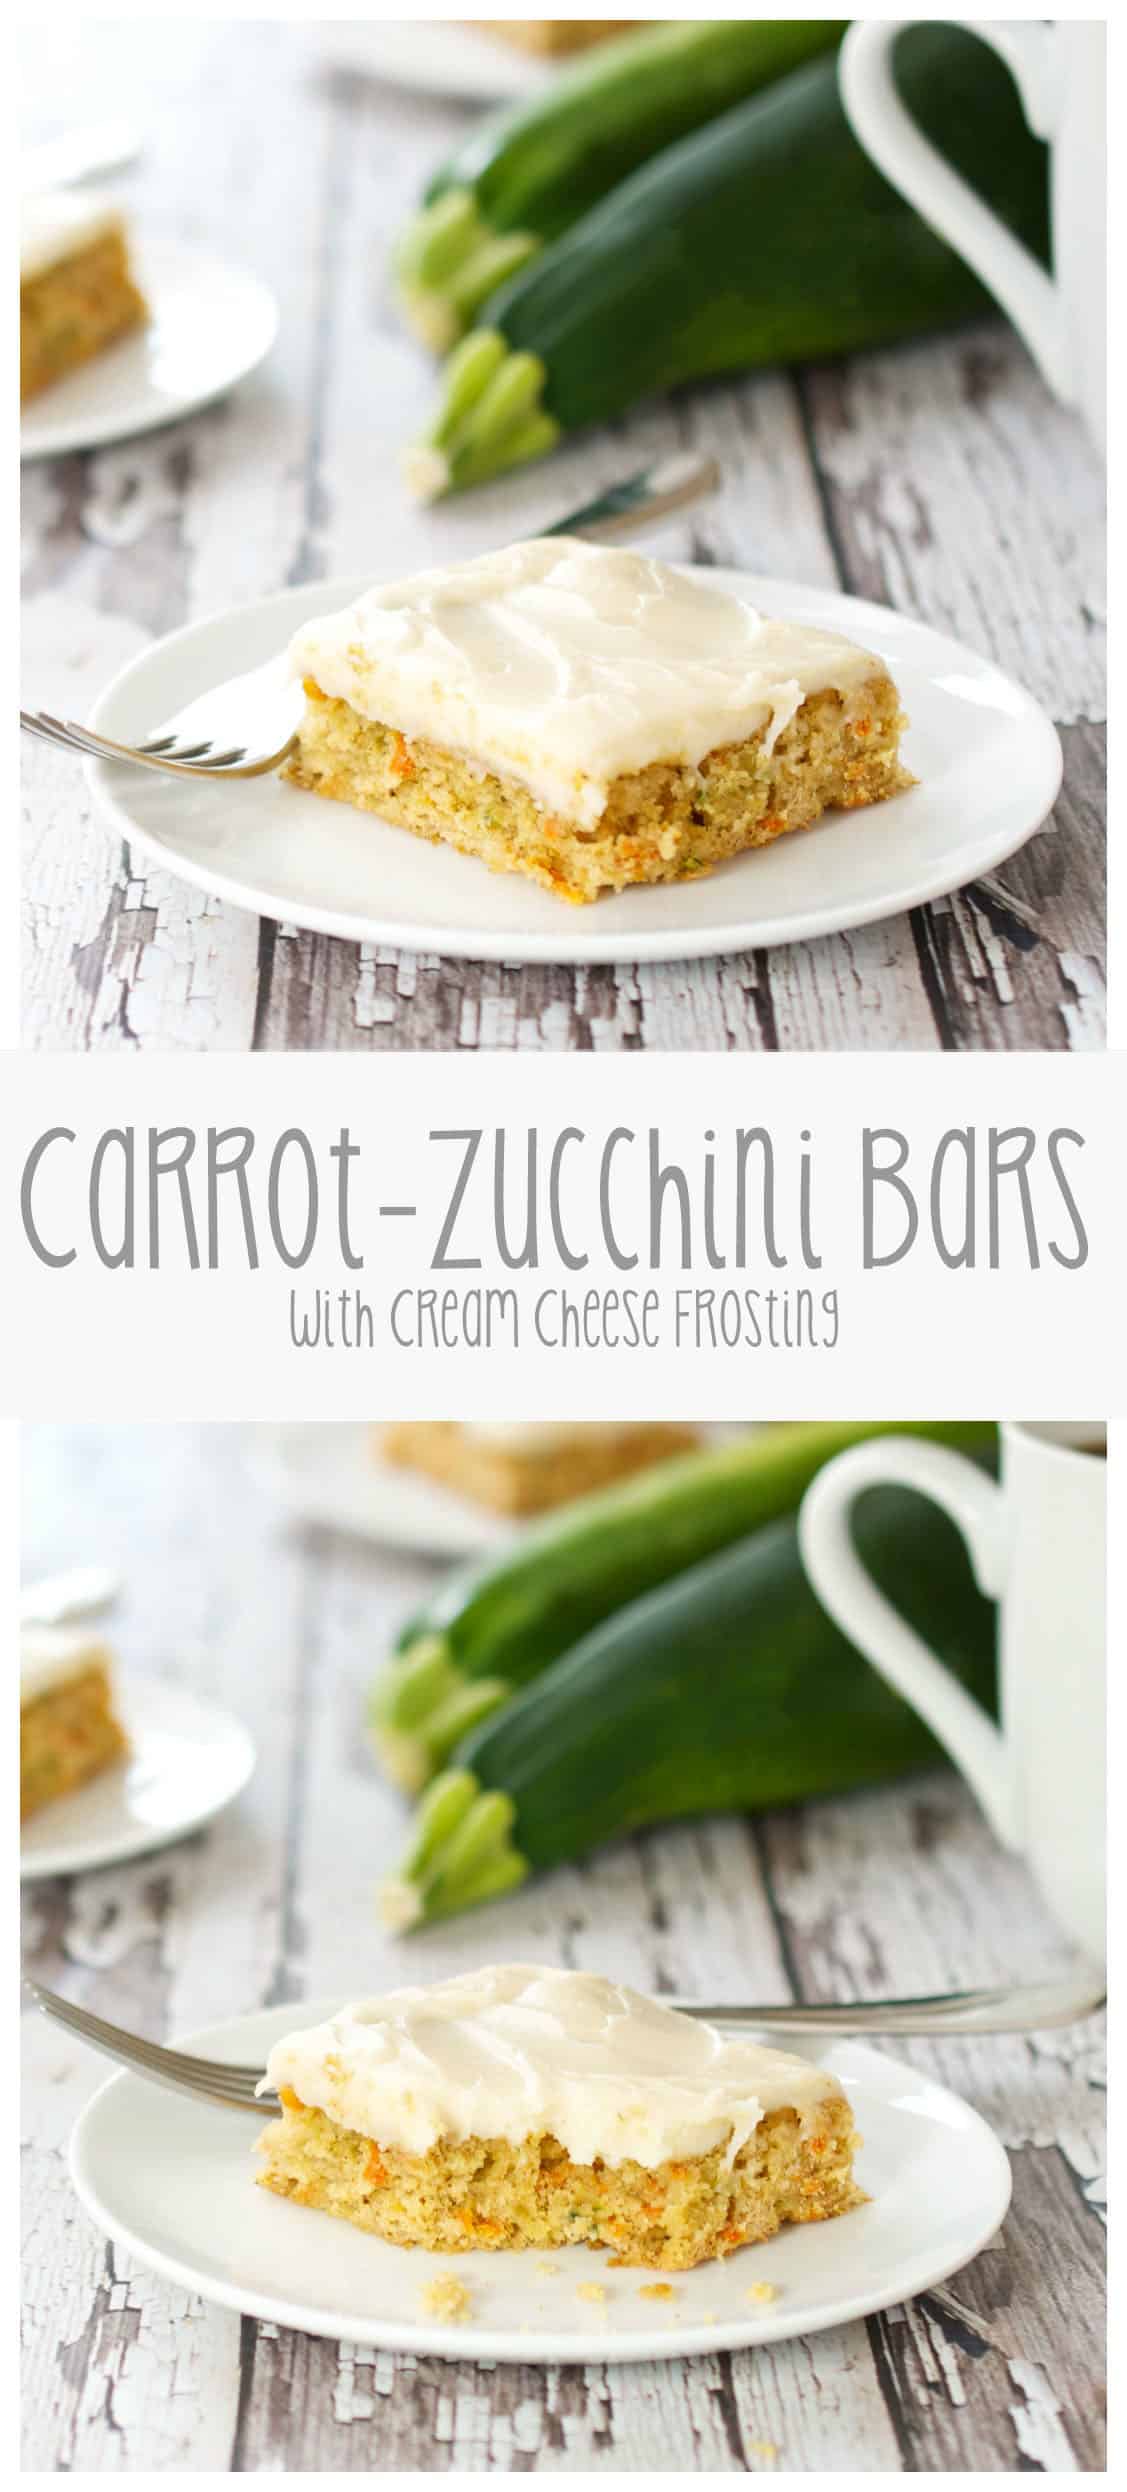 Carrot-Zucchini Bars with Cream Cheese Frosting for pinterest